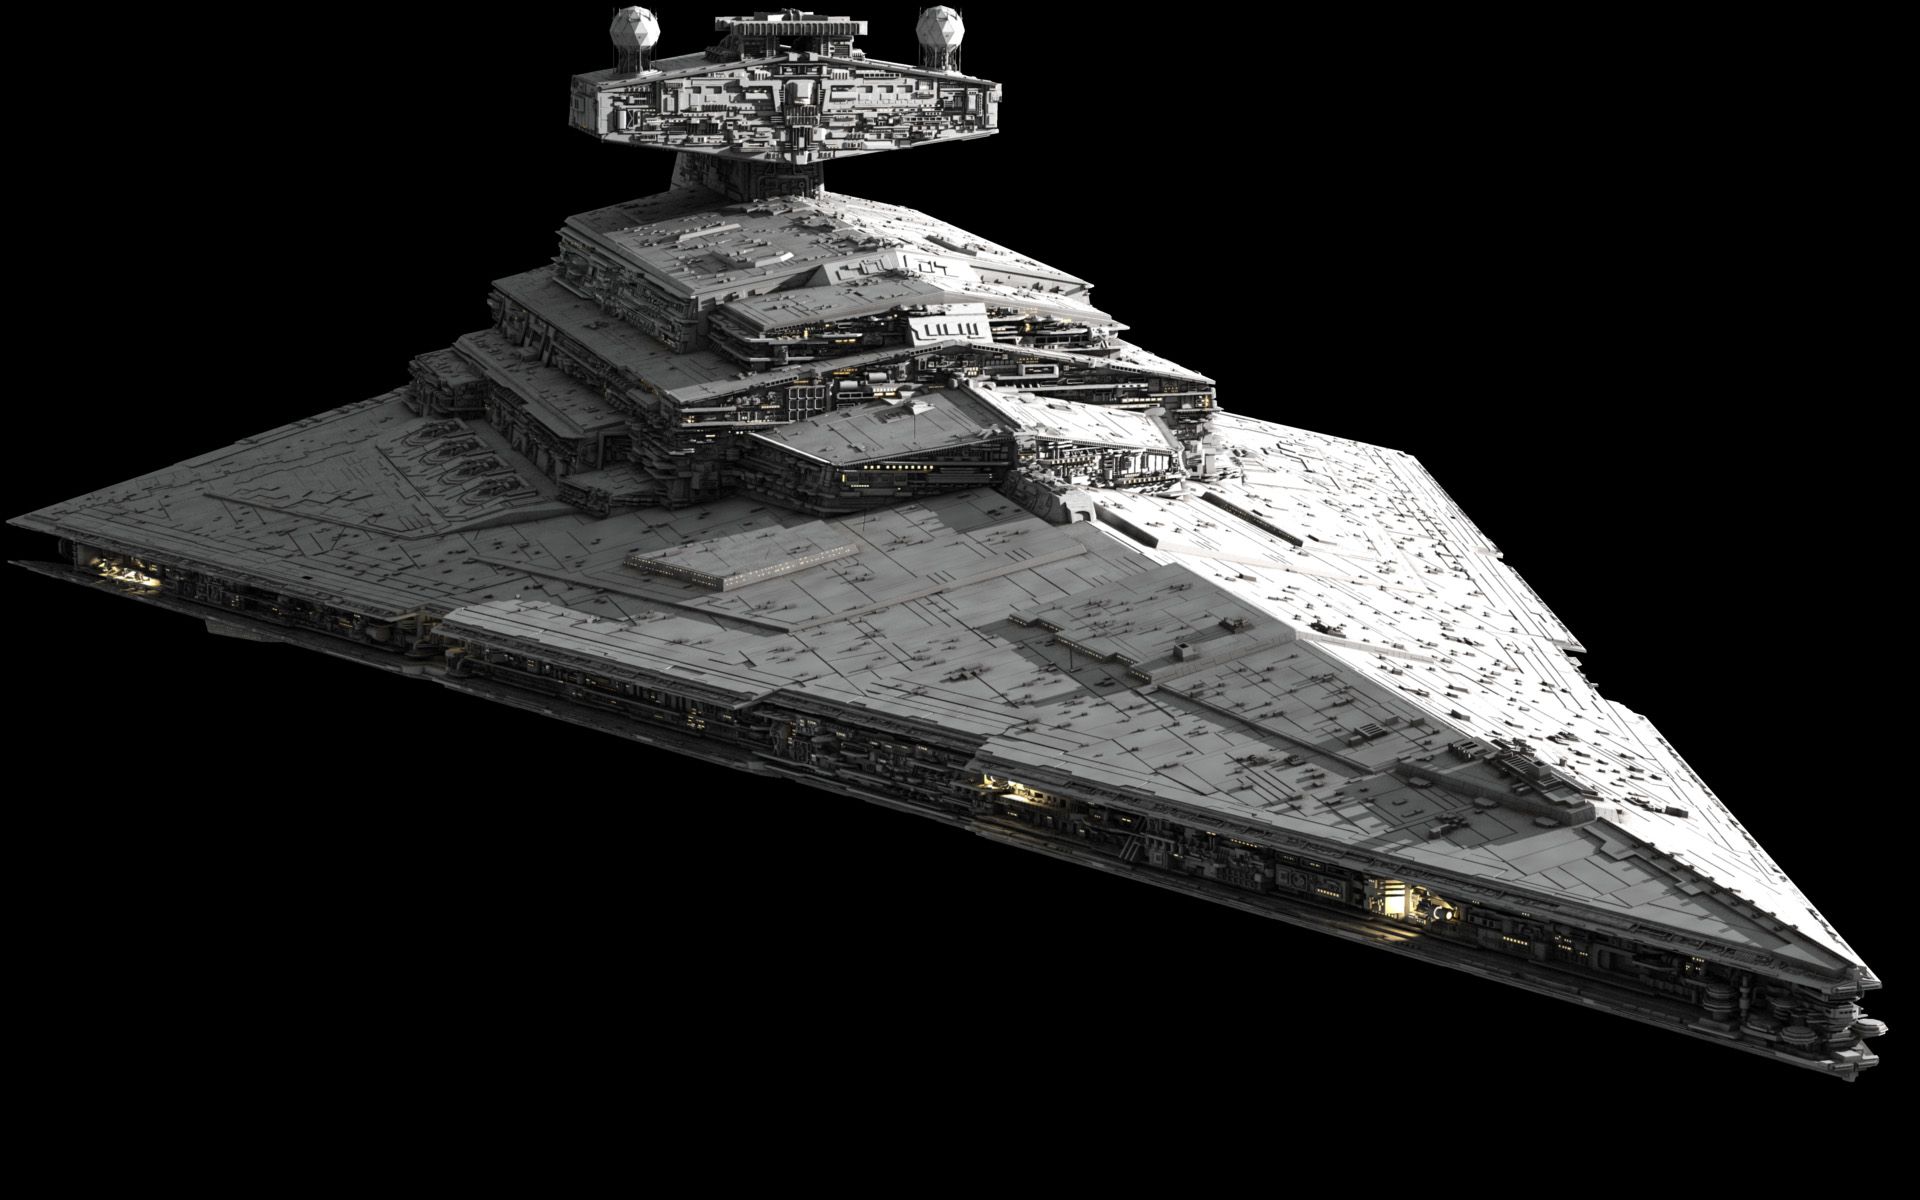 Imperial Star Destroyer 1080p HD Wallpaper Source